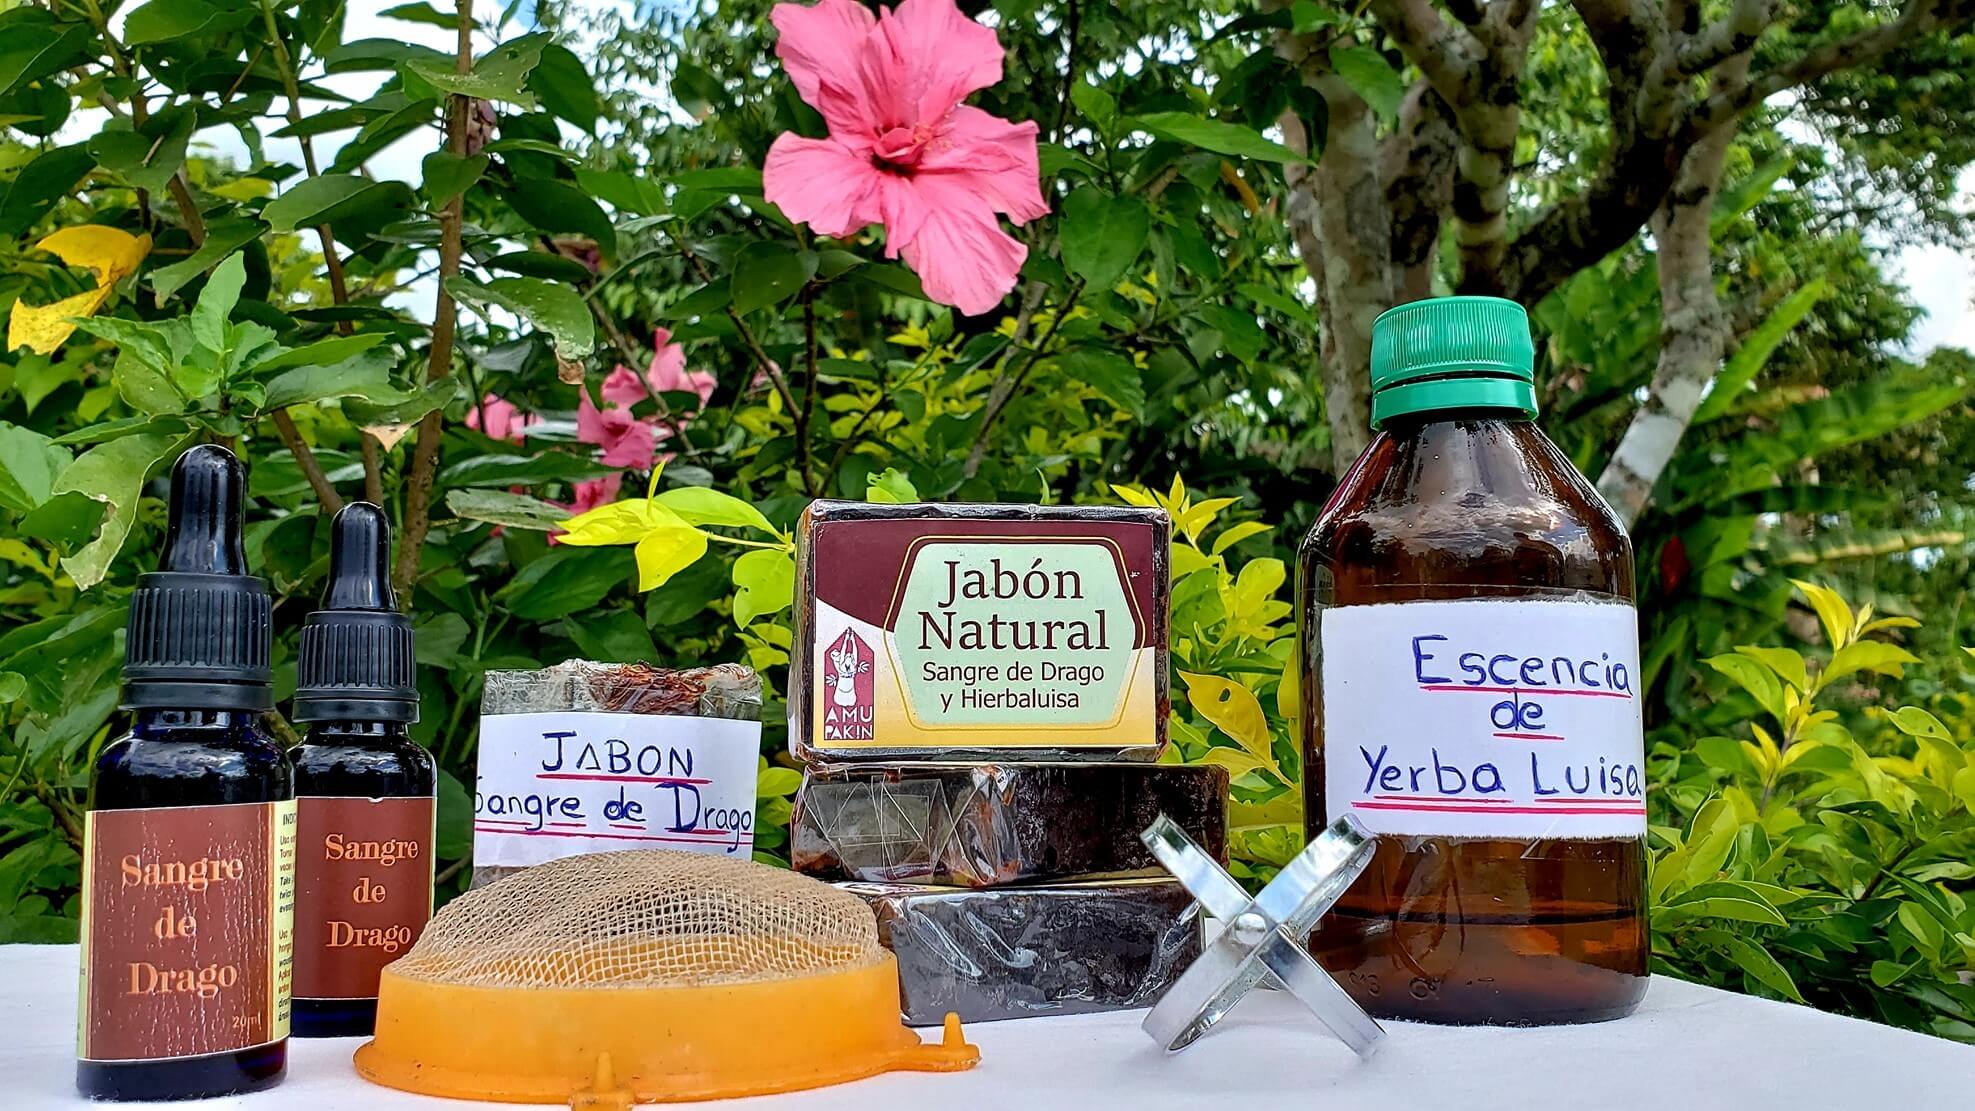 At Amupakin, in Archidona, Tena, Ecuador, they also produce natural products like soaps, essences and traditional plant-based medicines that you can buy when you visit this special place with Impactful Travel